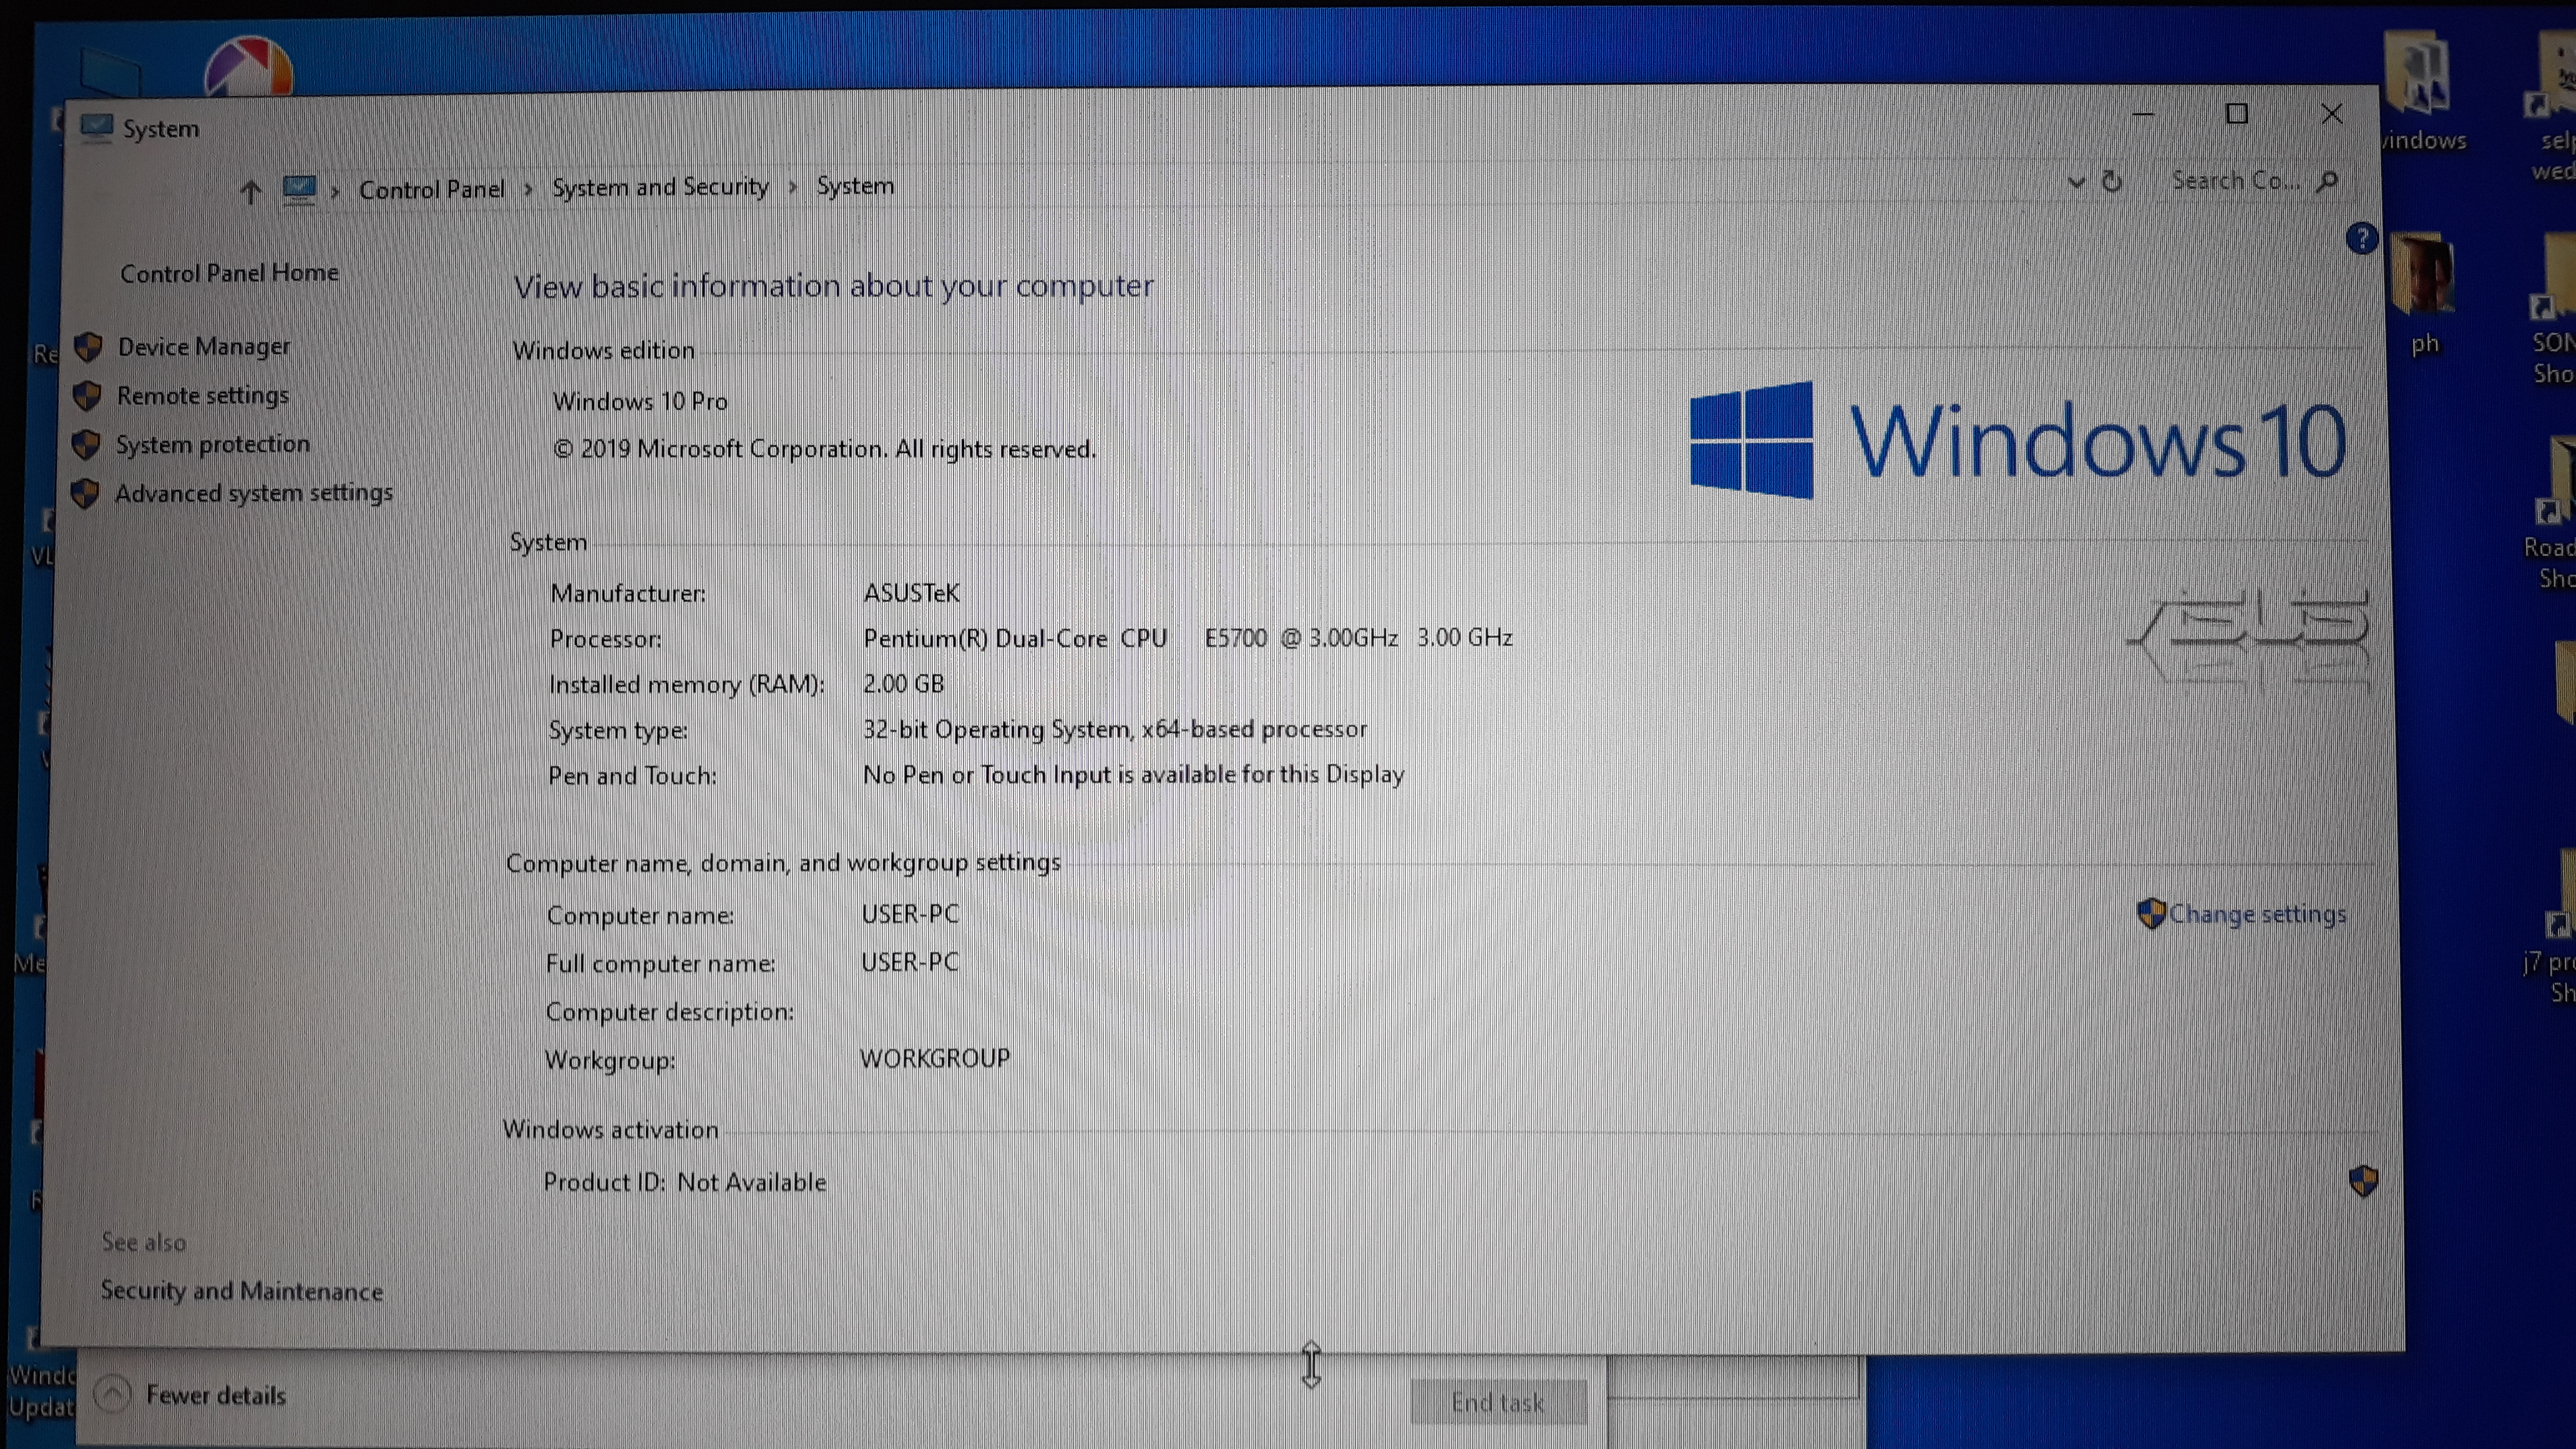 Win 10 Pro with 64bit Operating System, and x64-based Processor